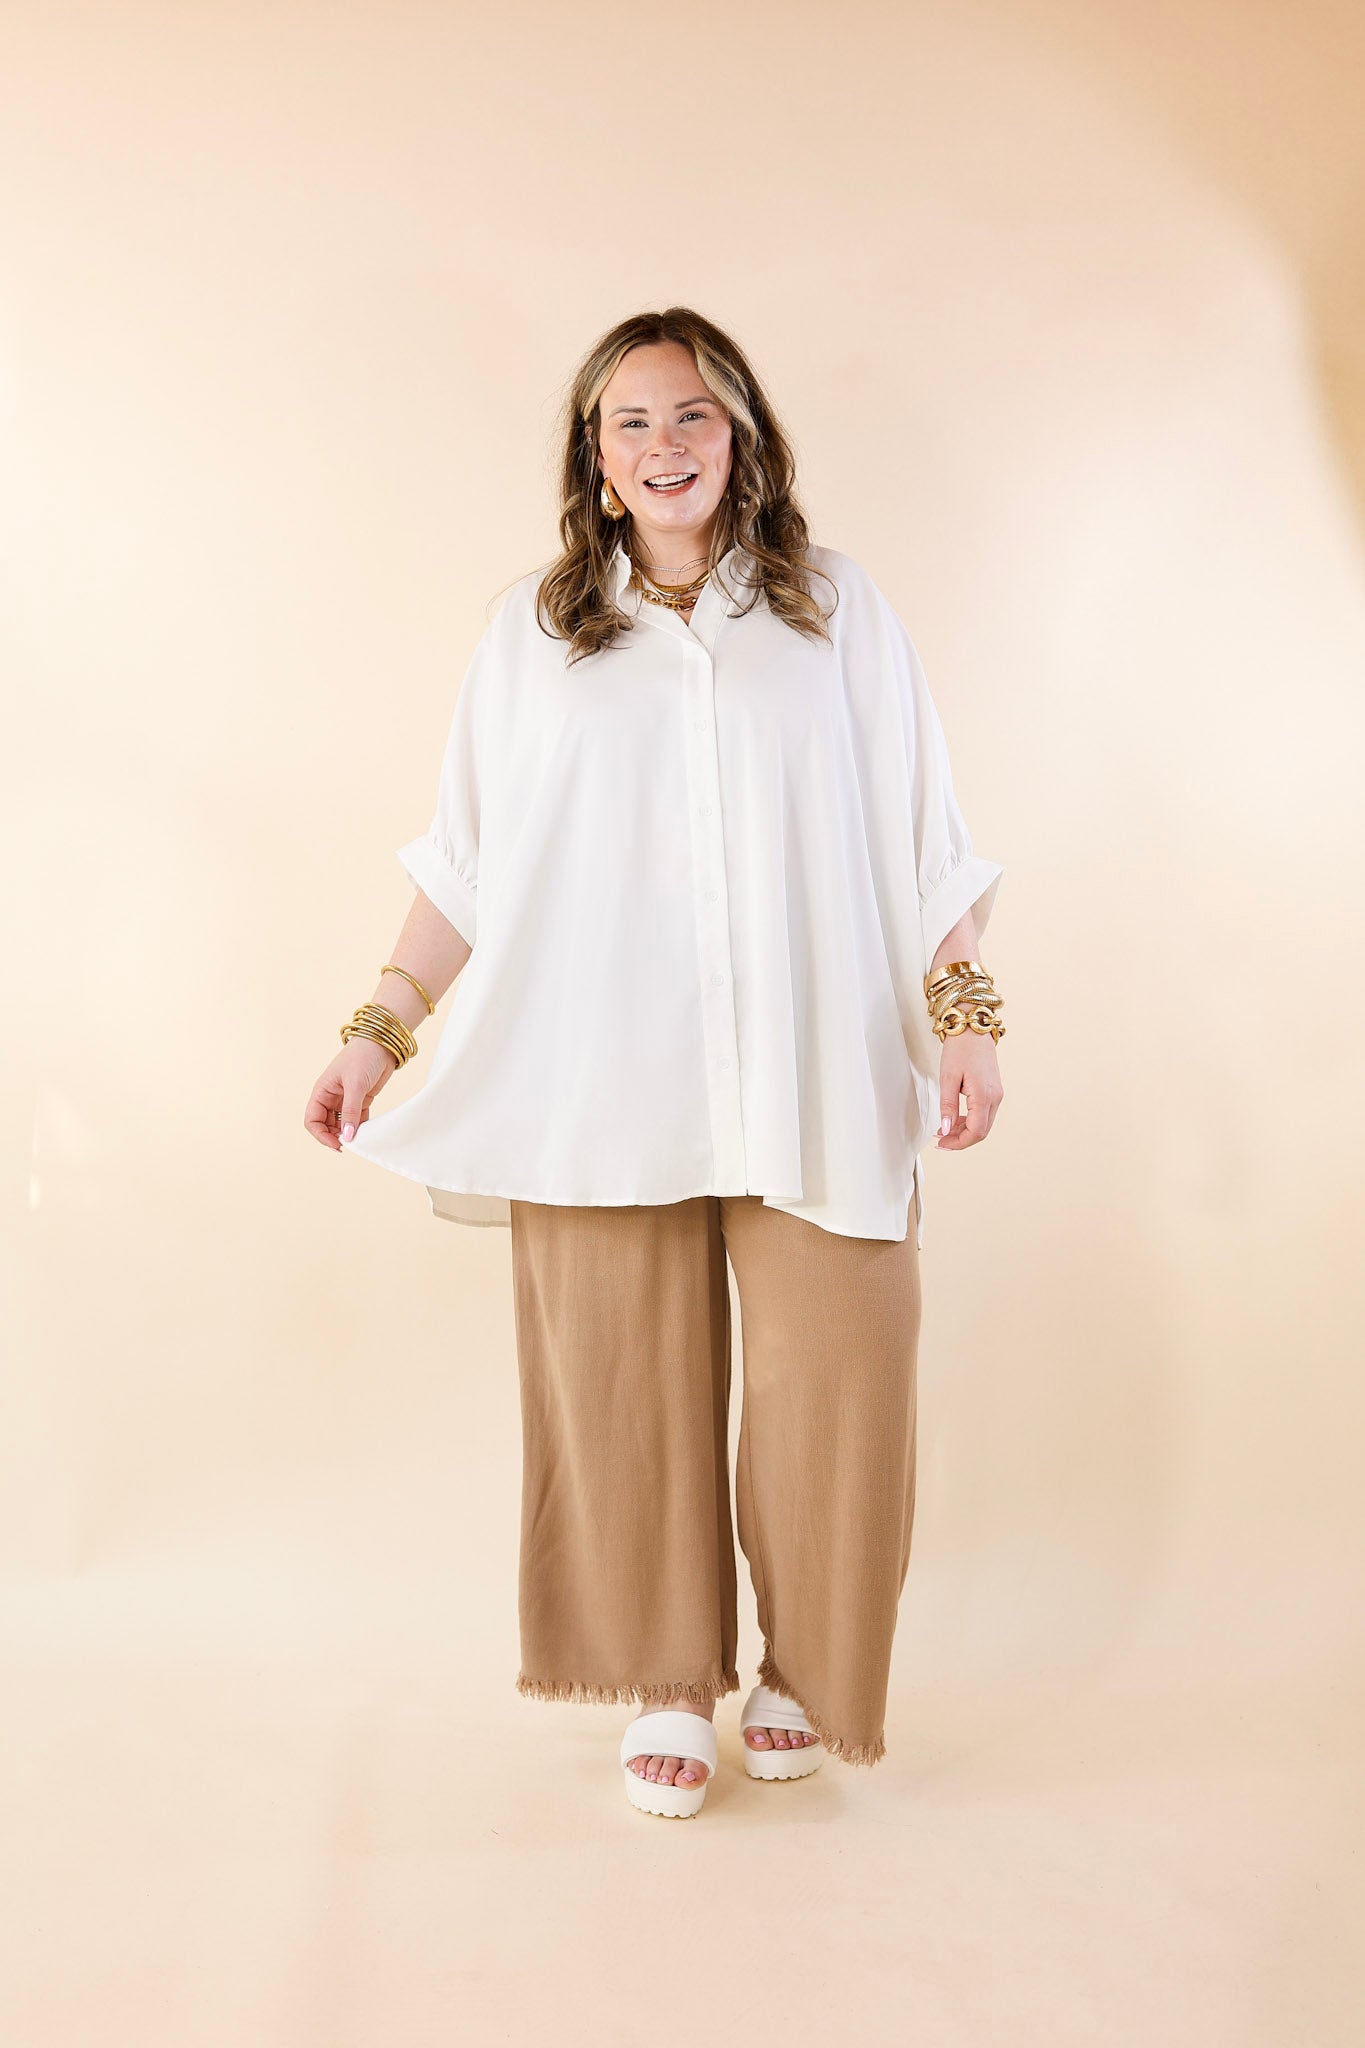 Right On Cue Elastic Waistband Cropped Pants with Frayed Hem in Mocha Brown - Giddy Up Glamour Boutique